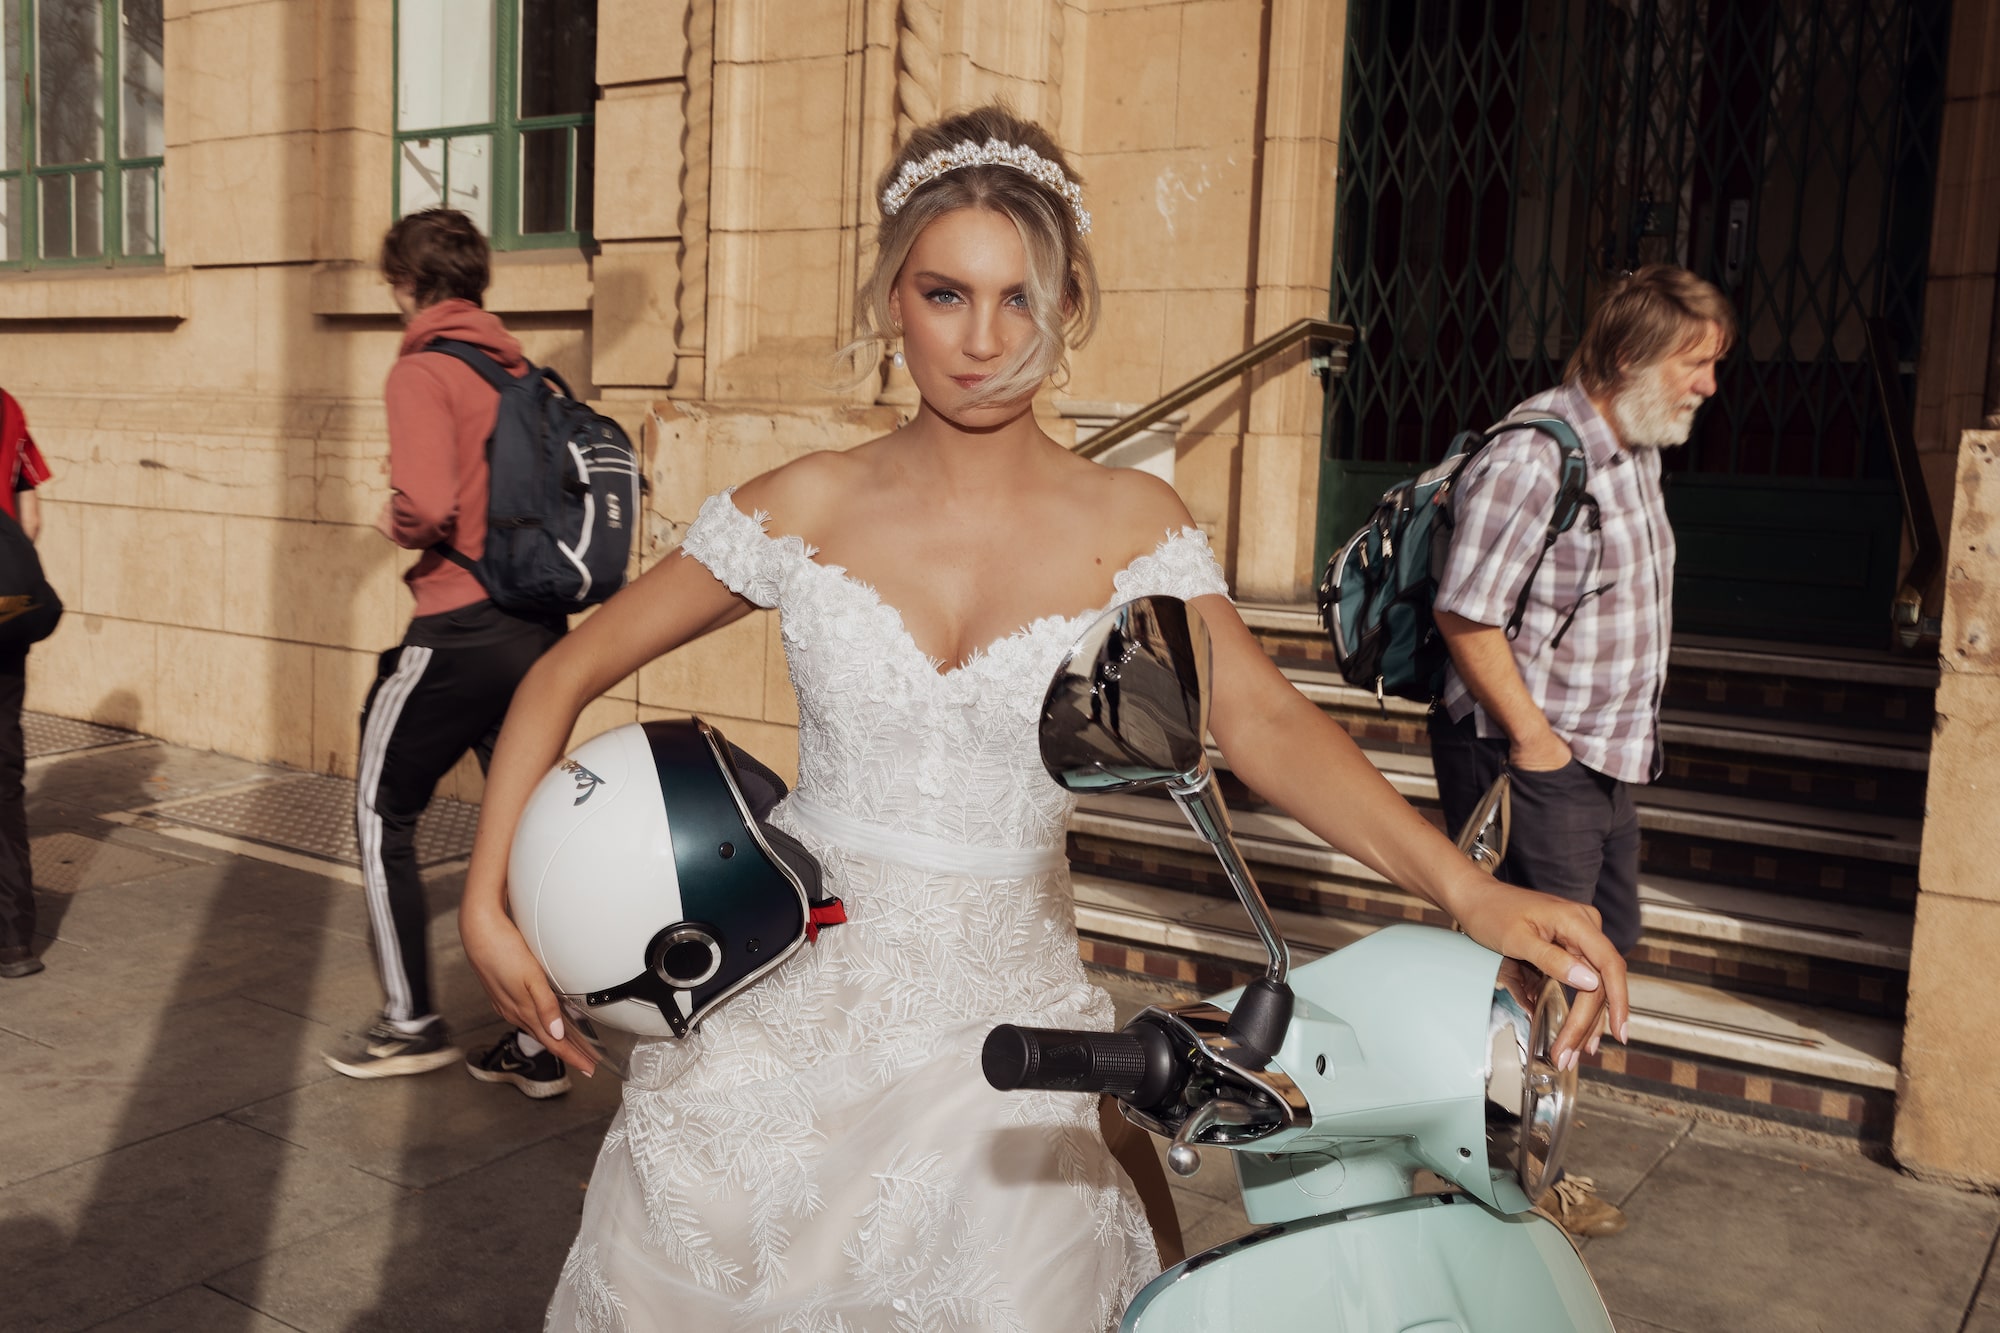 Model sitting on mint green scooter holding a white helmet, facing the camera